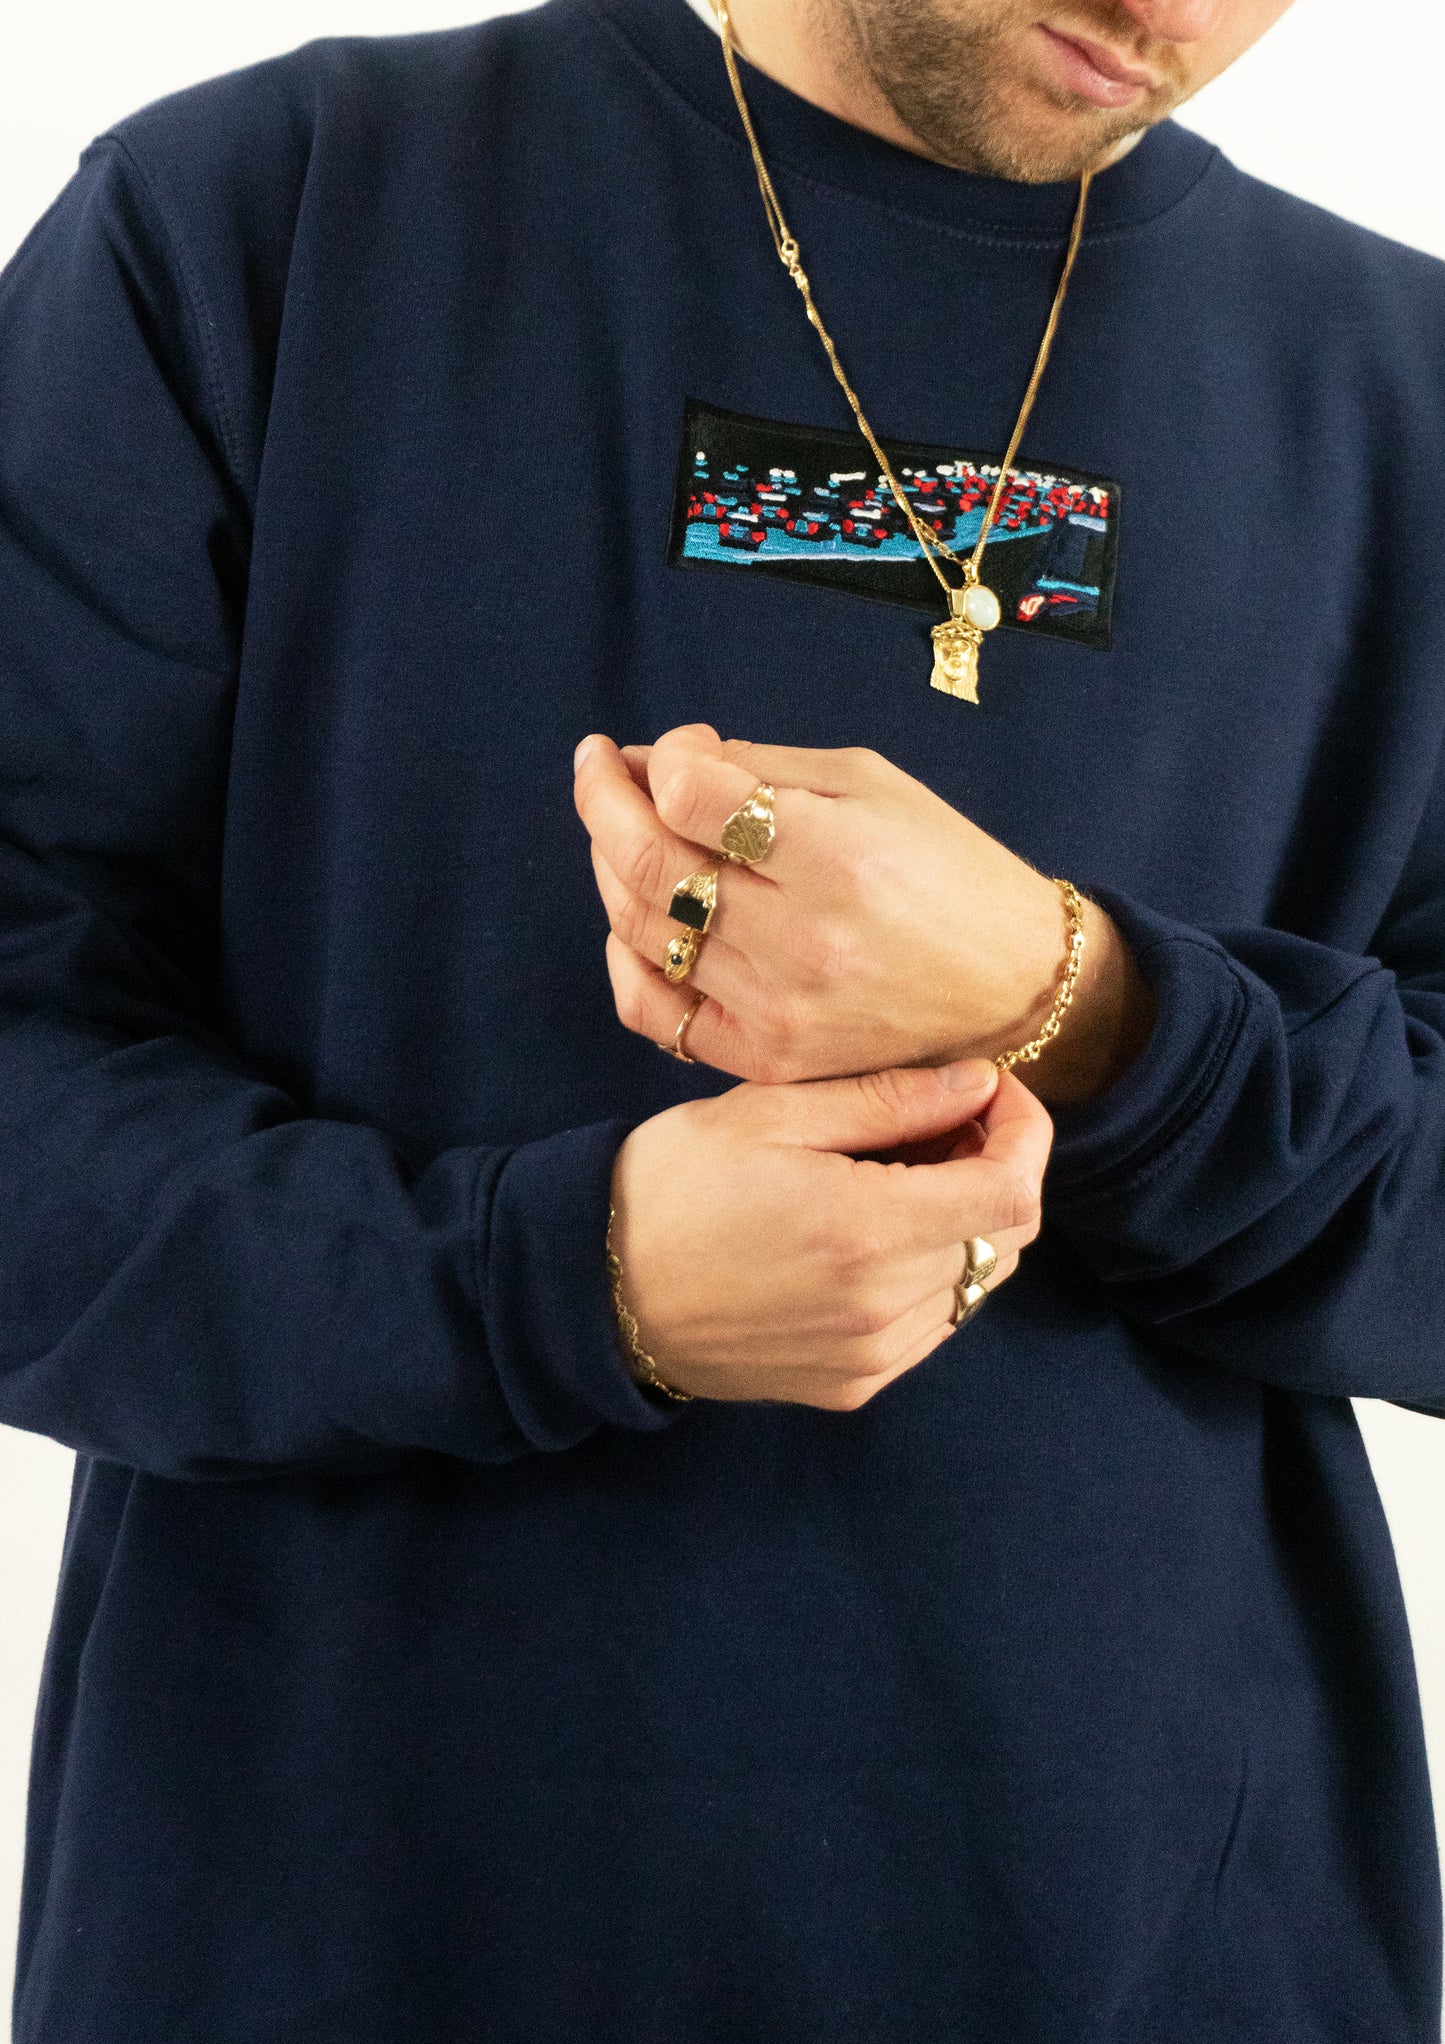 A/W23 Embroidered 'Night Traffic' Crewneck {navy}